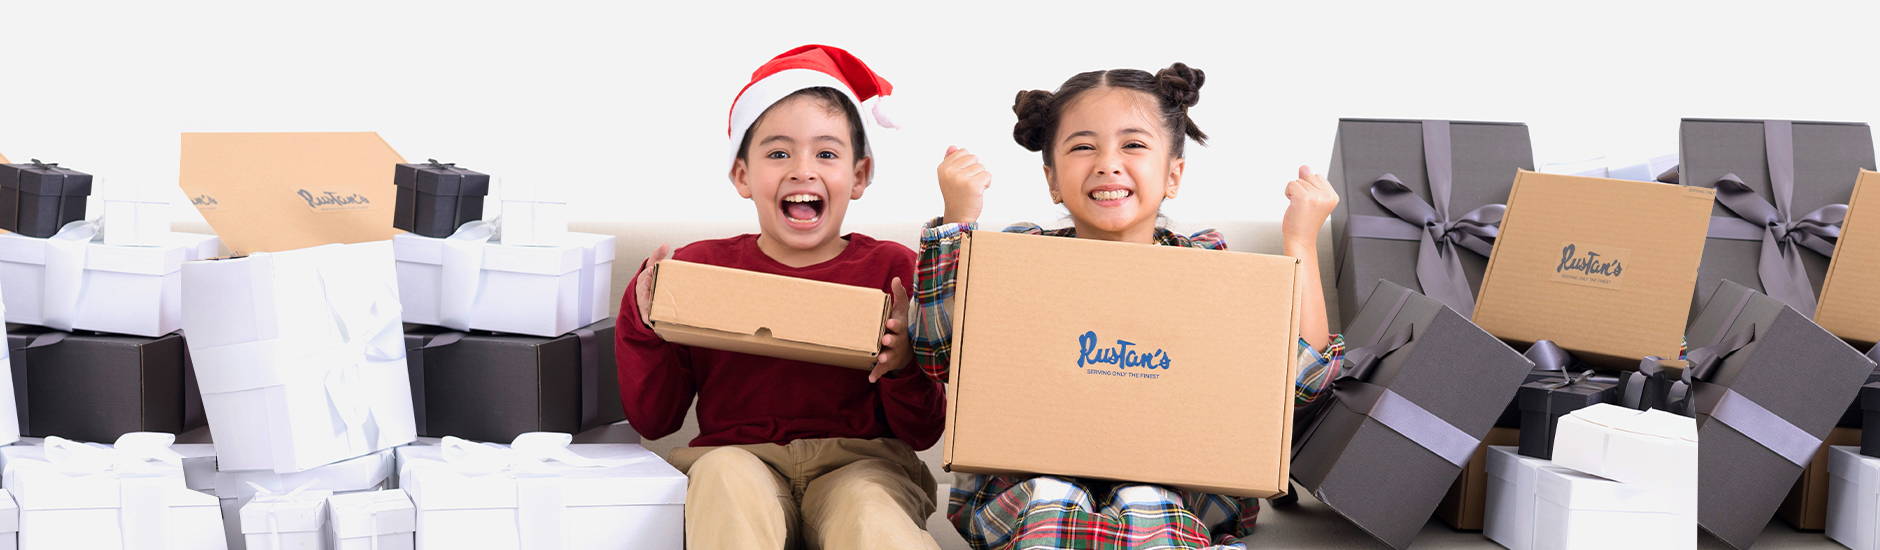 Extraordinary Gifts for the Ones You Love from Rustans.com 12.12 Sale